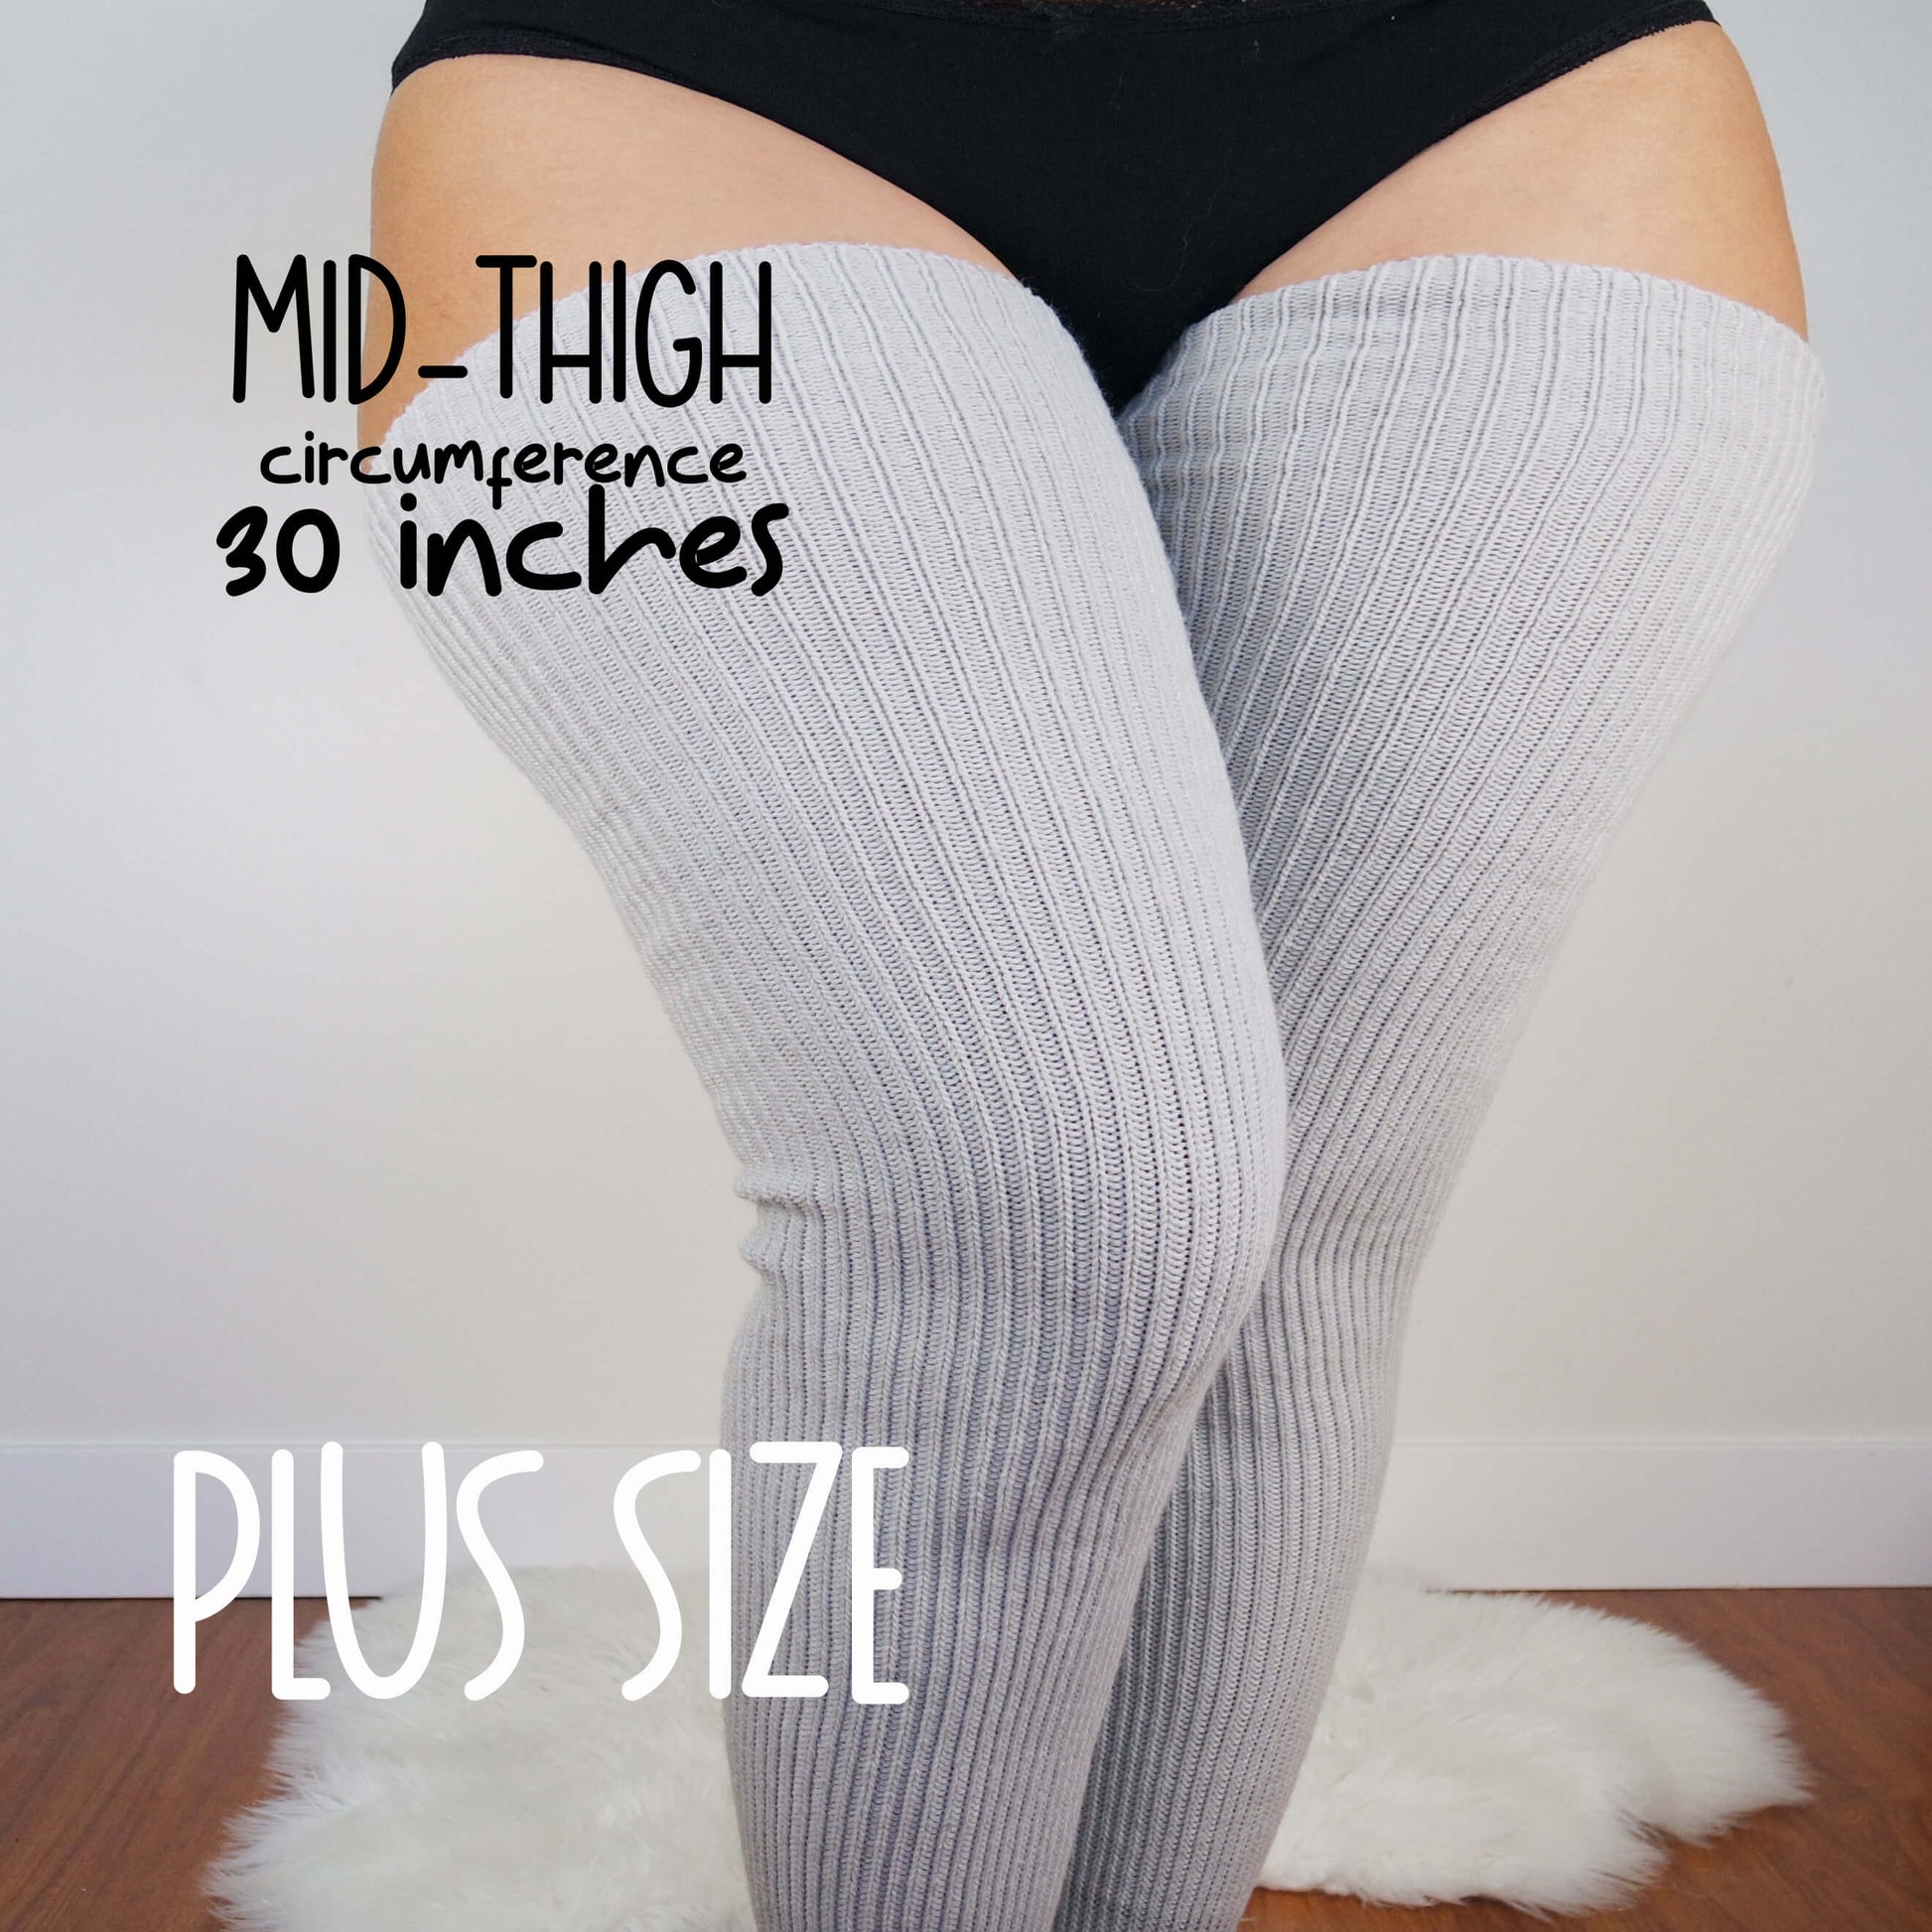 Sockmate plus size thigh socks, ribbed style grey color, extra long leg warmers for curve legs, plus size women outfits